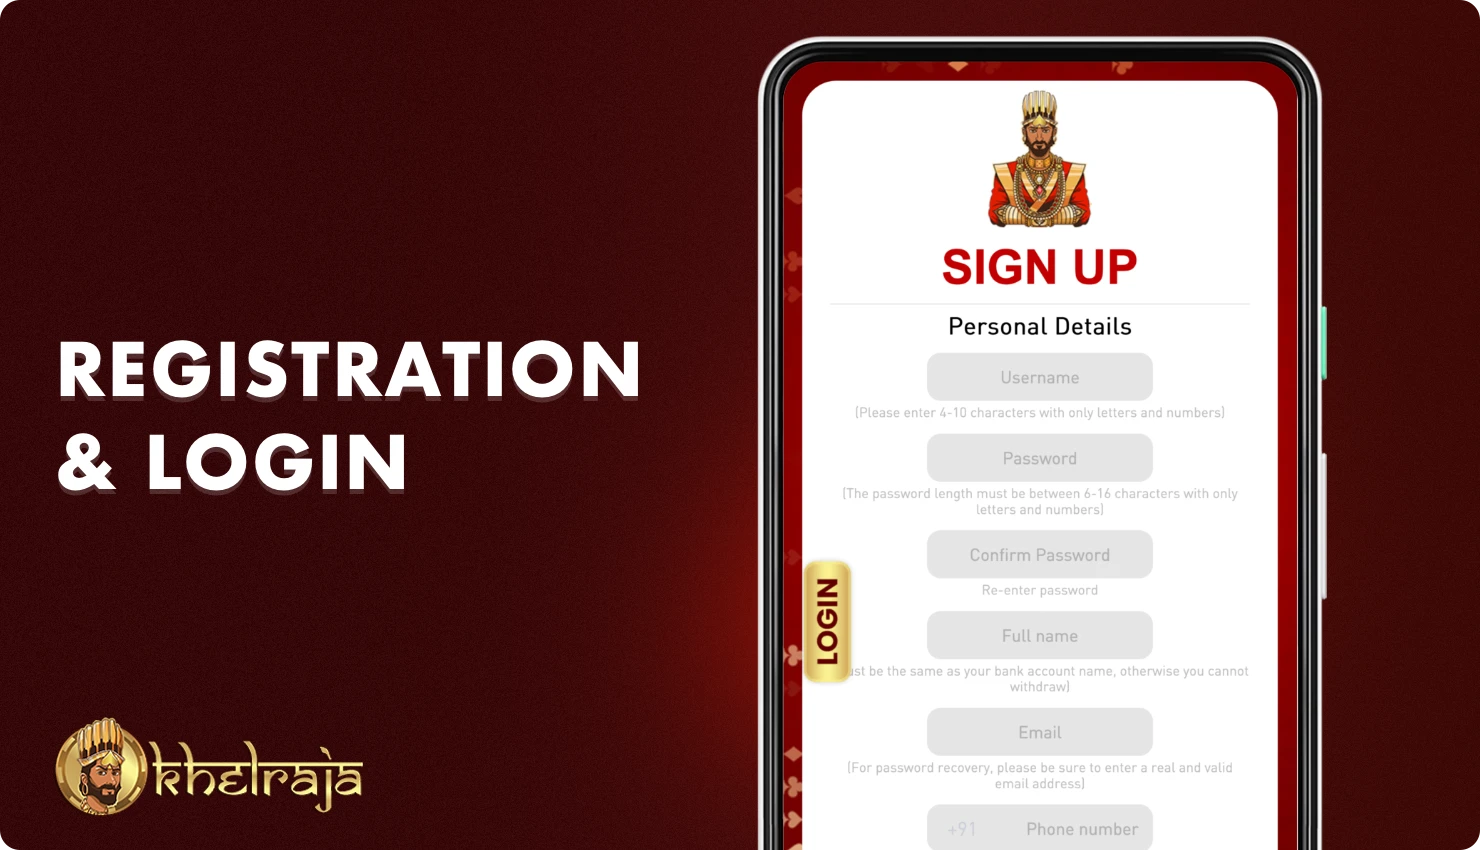 You can use the Khelraja app to create an account and register on the platform